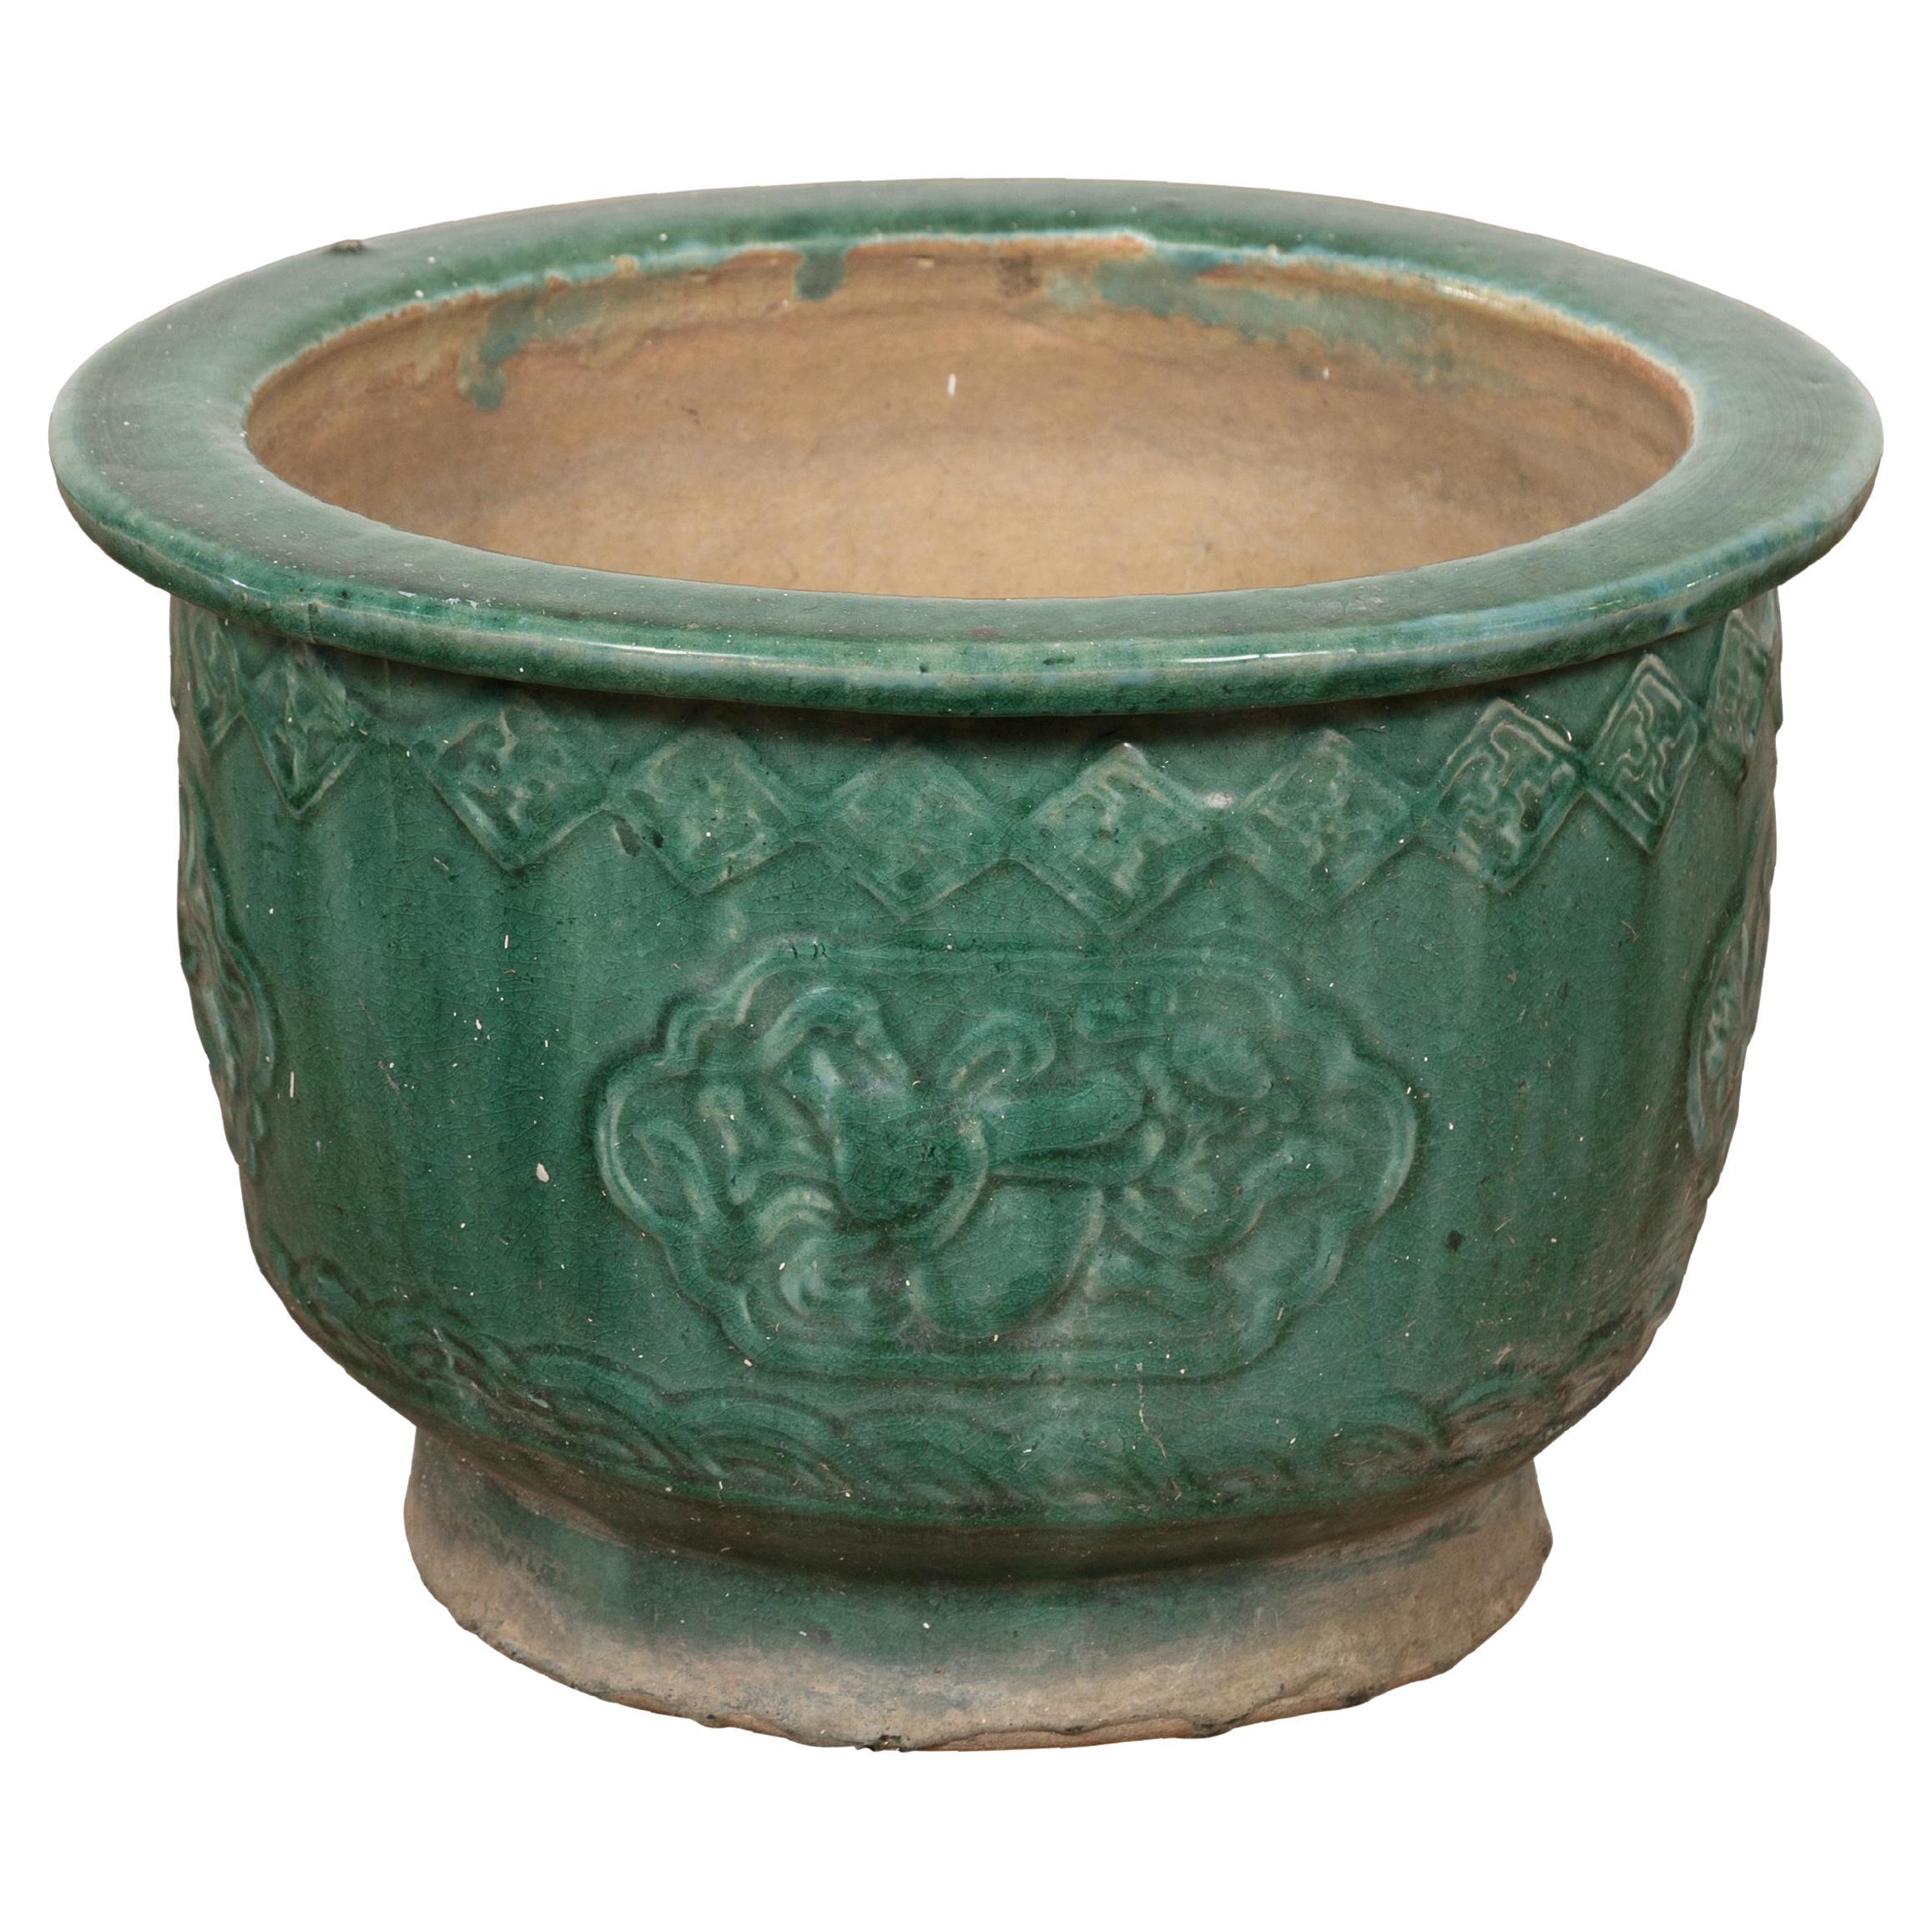 Small Chinese Qing Dynasty Hunan Style Green Glazed Planter with Cartouches